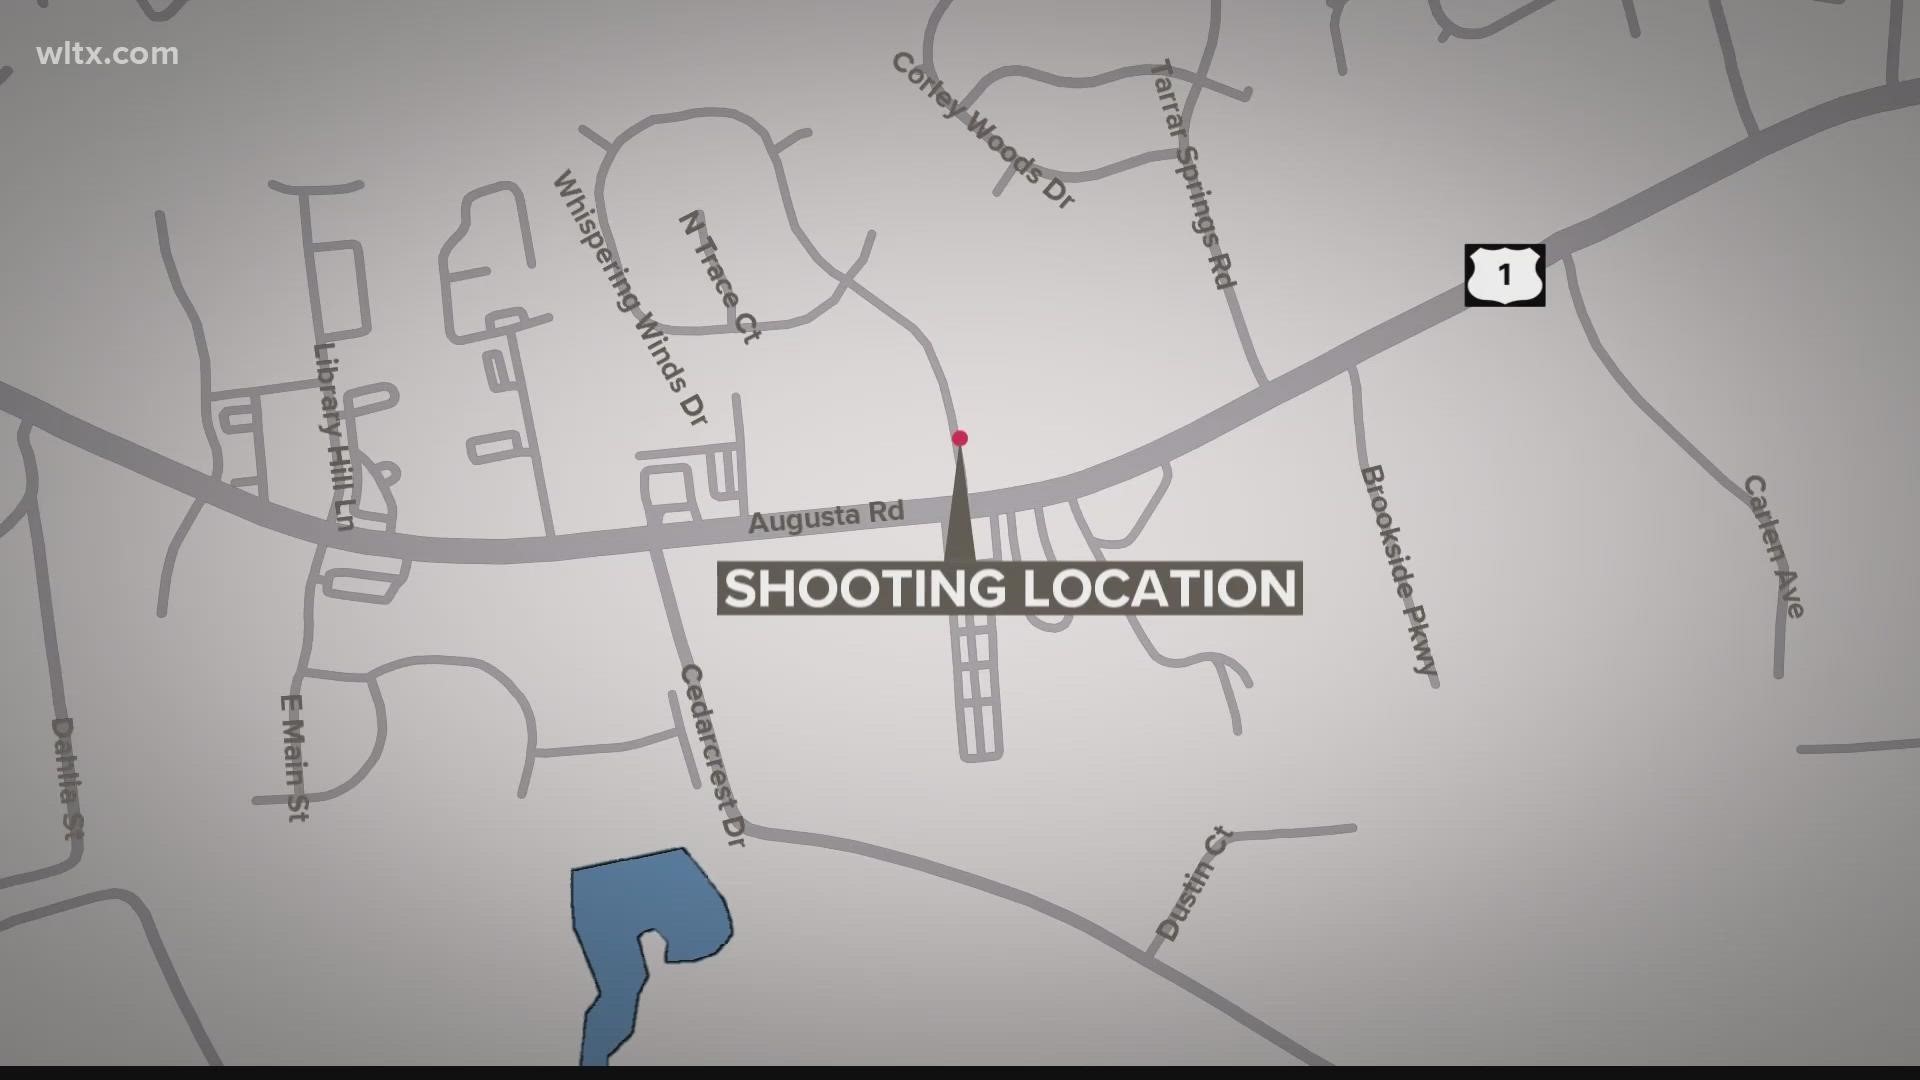 Lexington Police have arrested a man in connection to a shooting at a home Thursday evening.